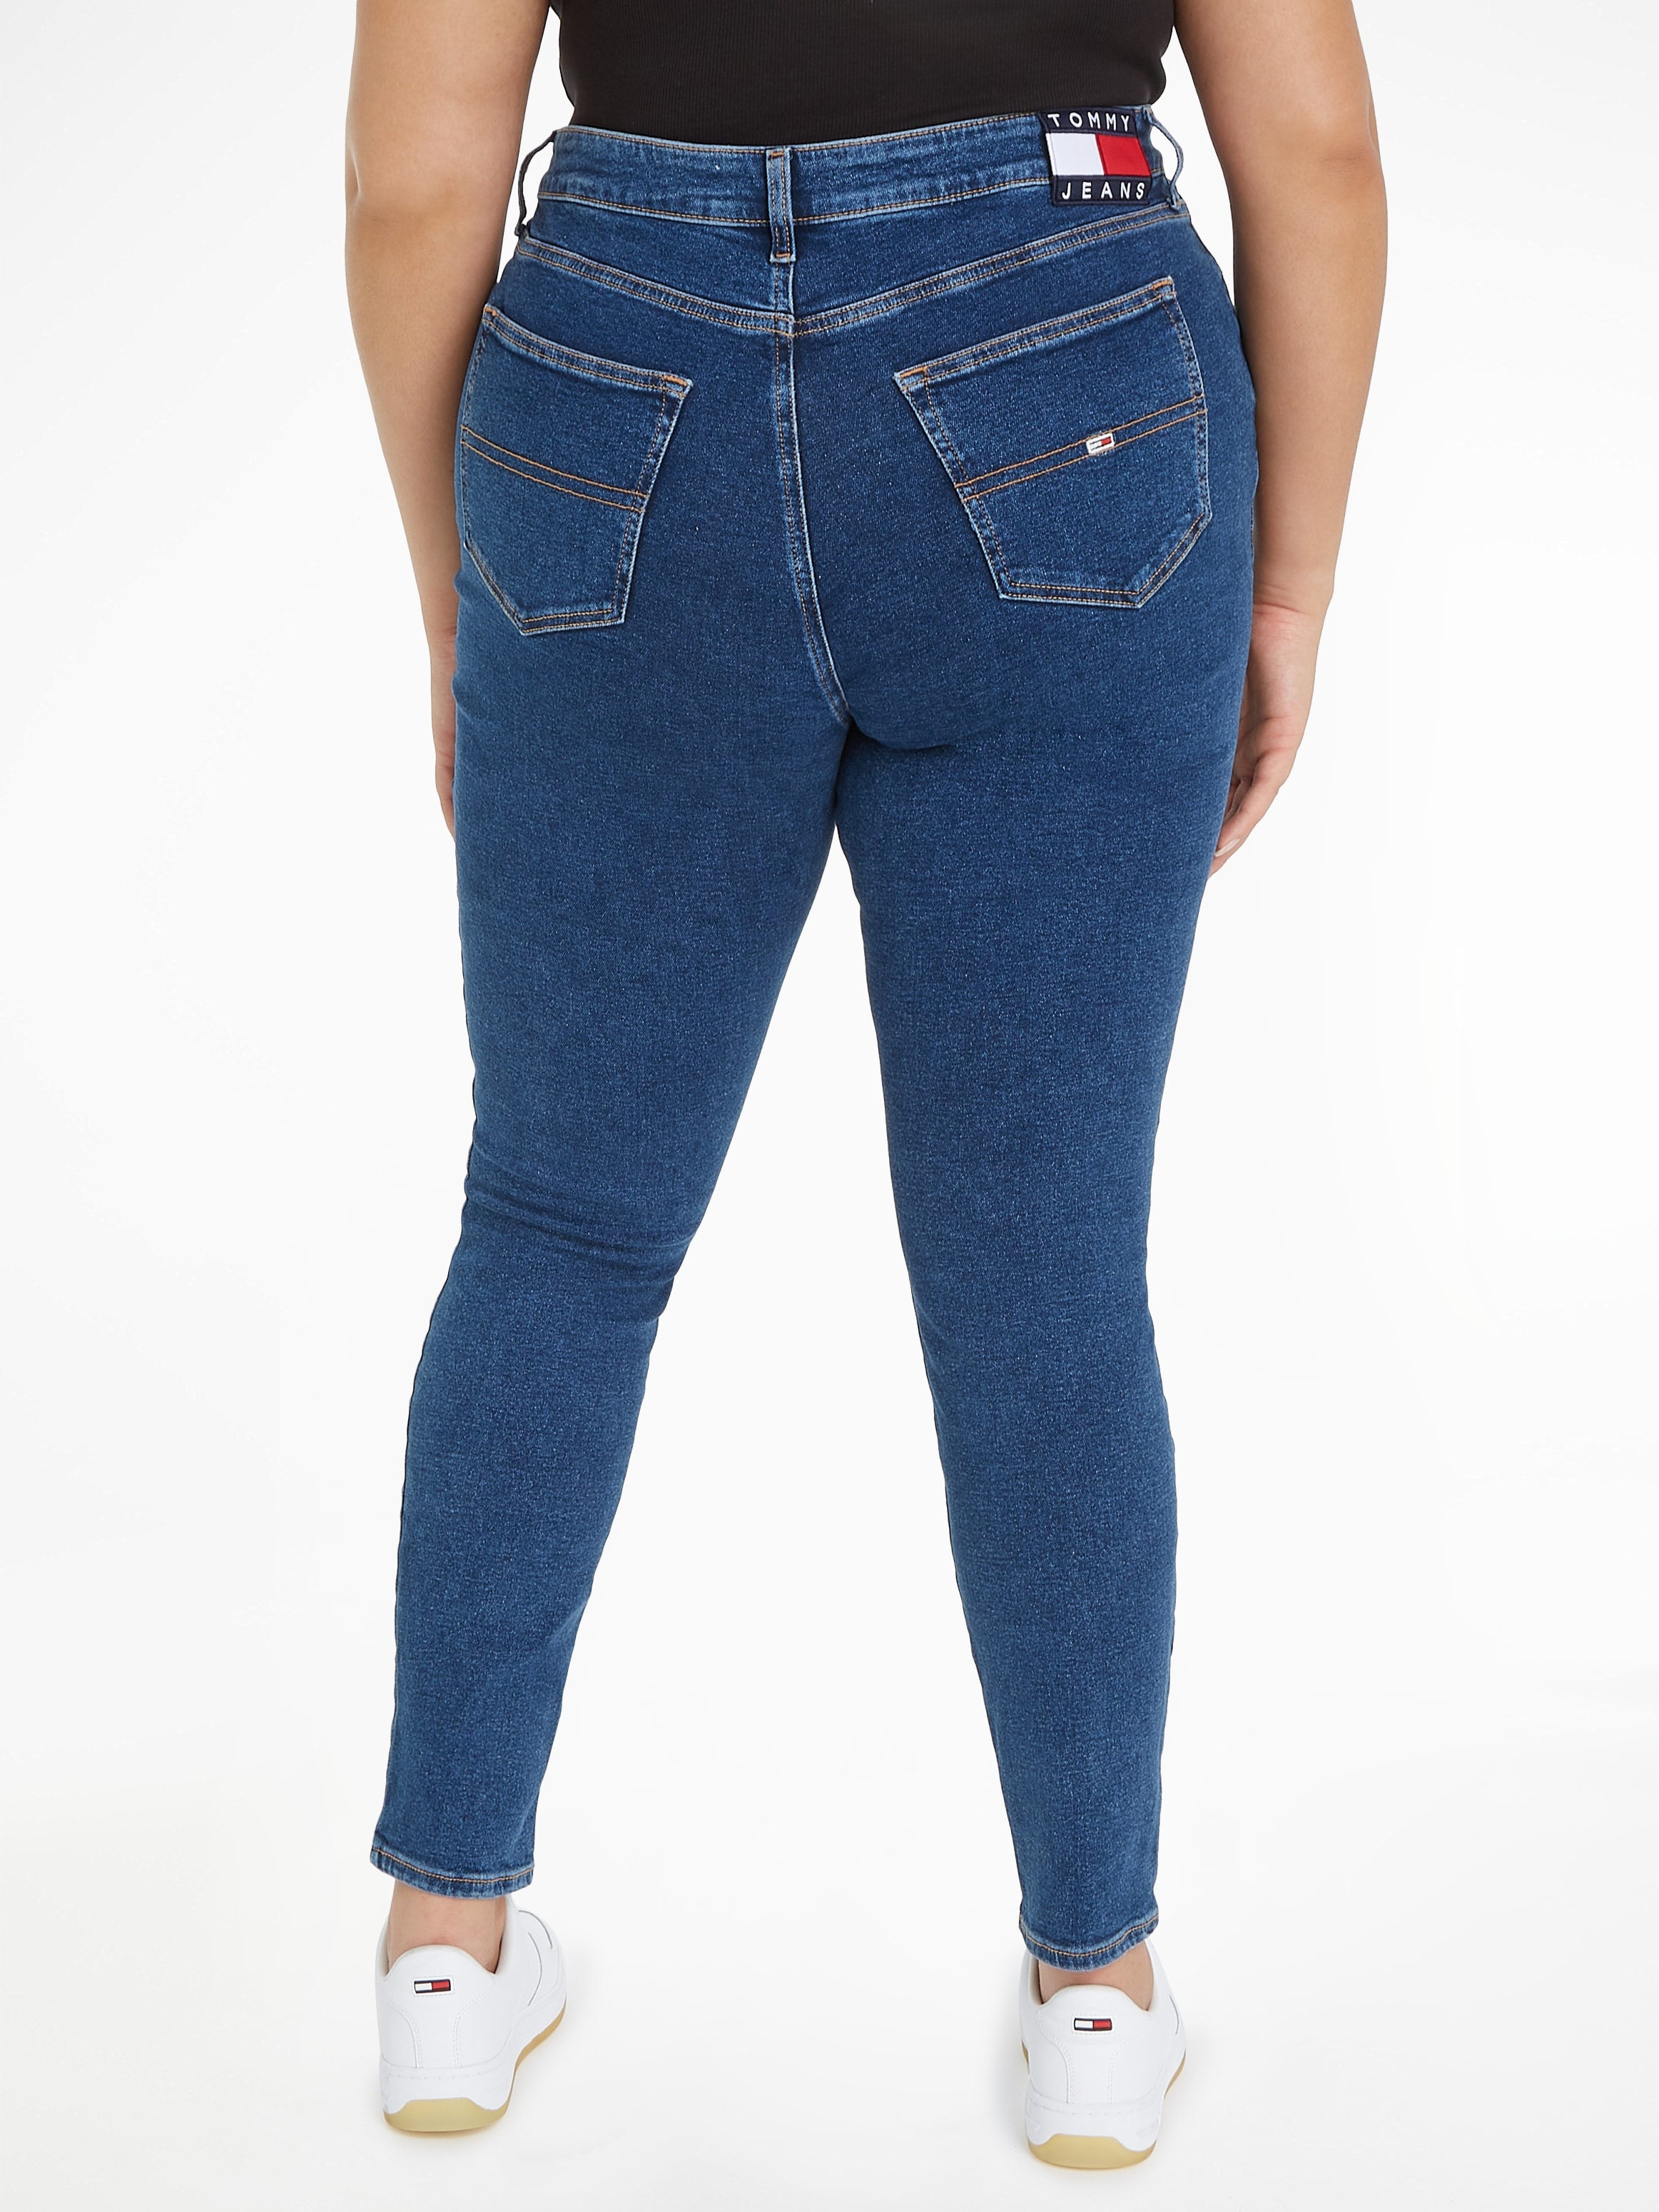 wird angeboten ♕ Tommy in SIZE Skinny-fit-Jeans, Jeans PLUS Curve CURVE, bei Weiten Jeans